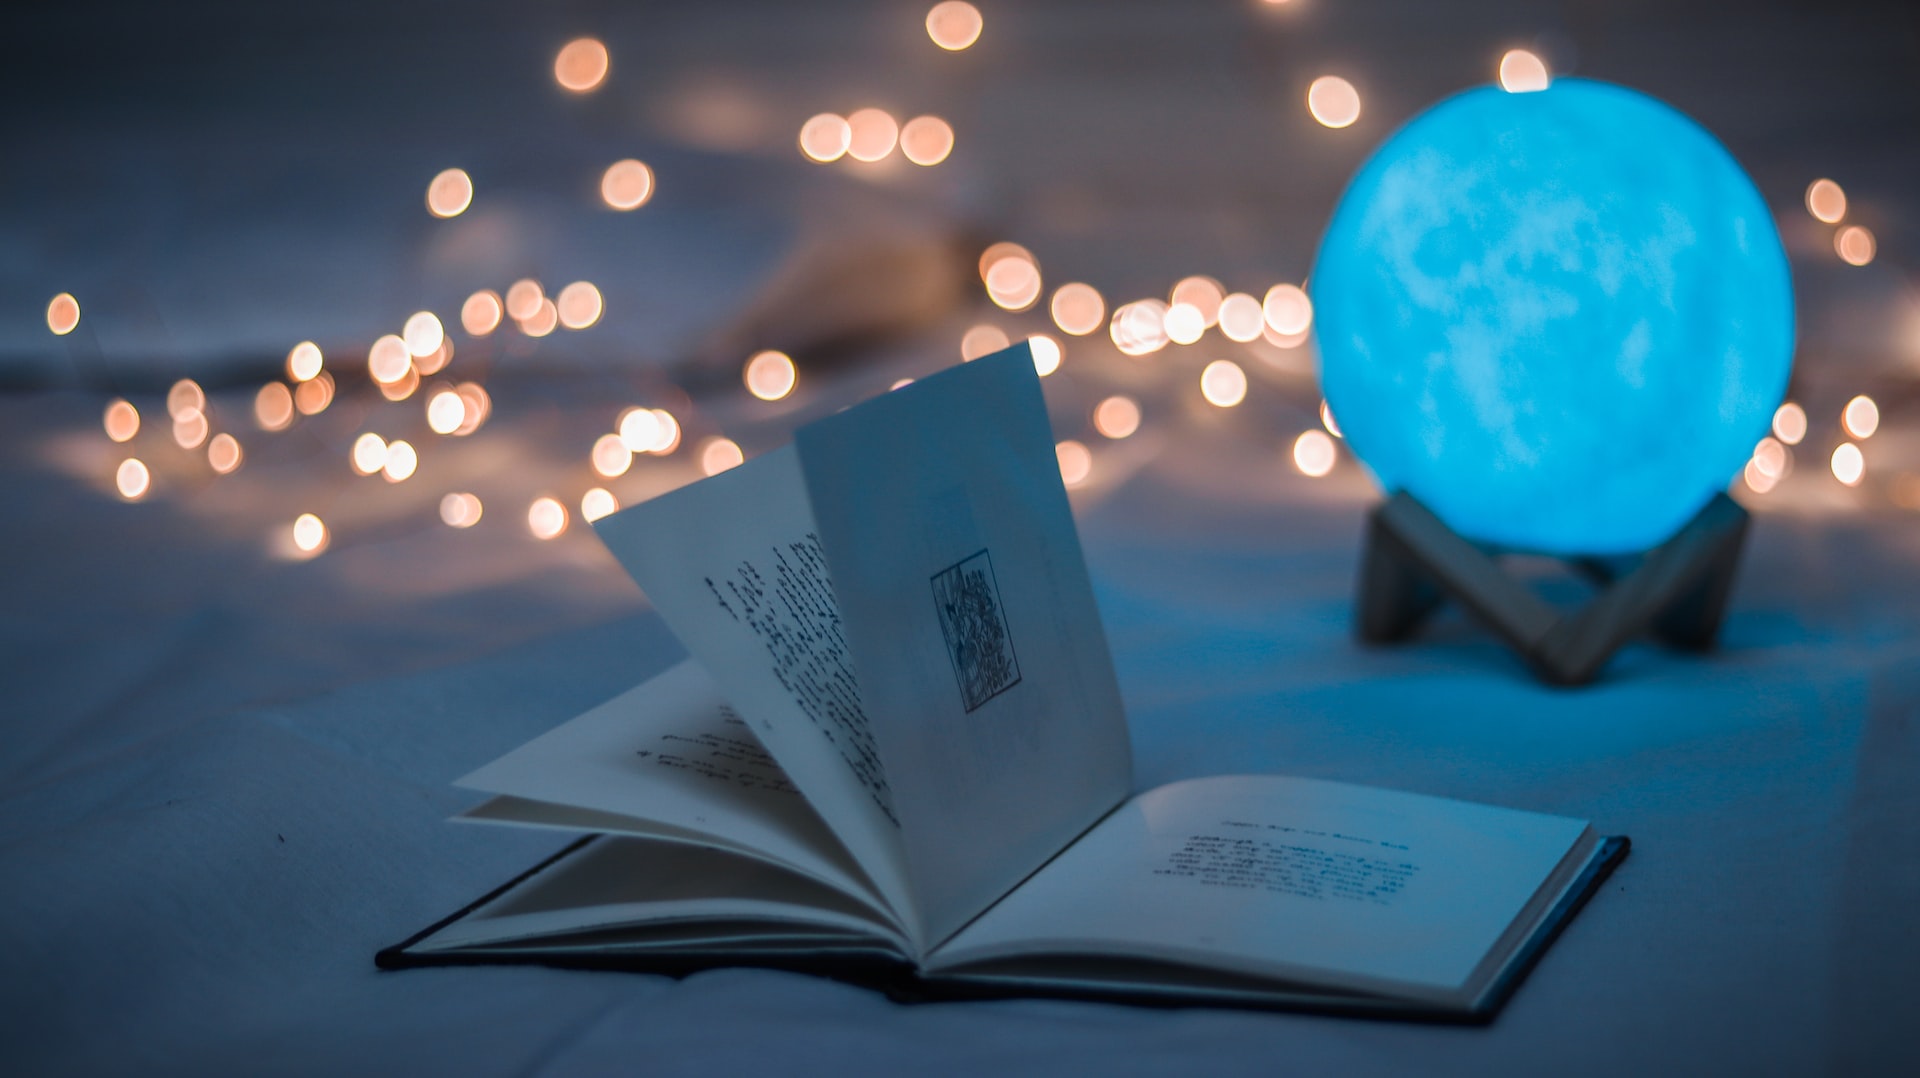 A mysterious book on a table with a glowing globe